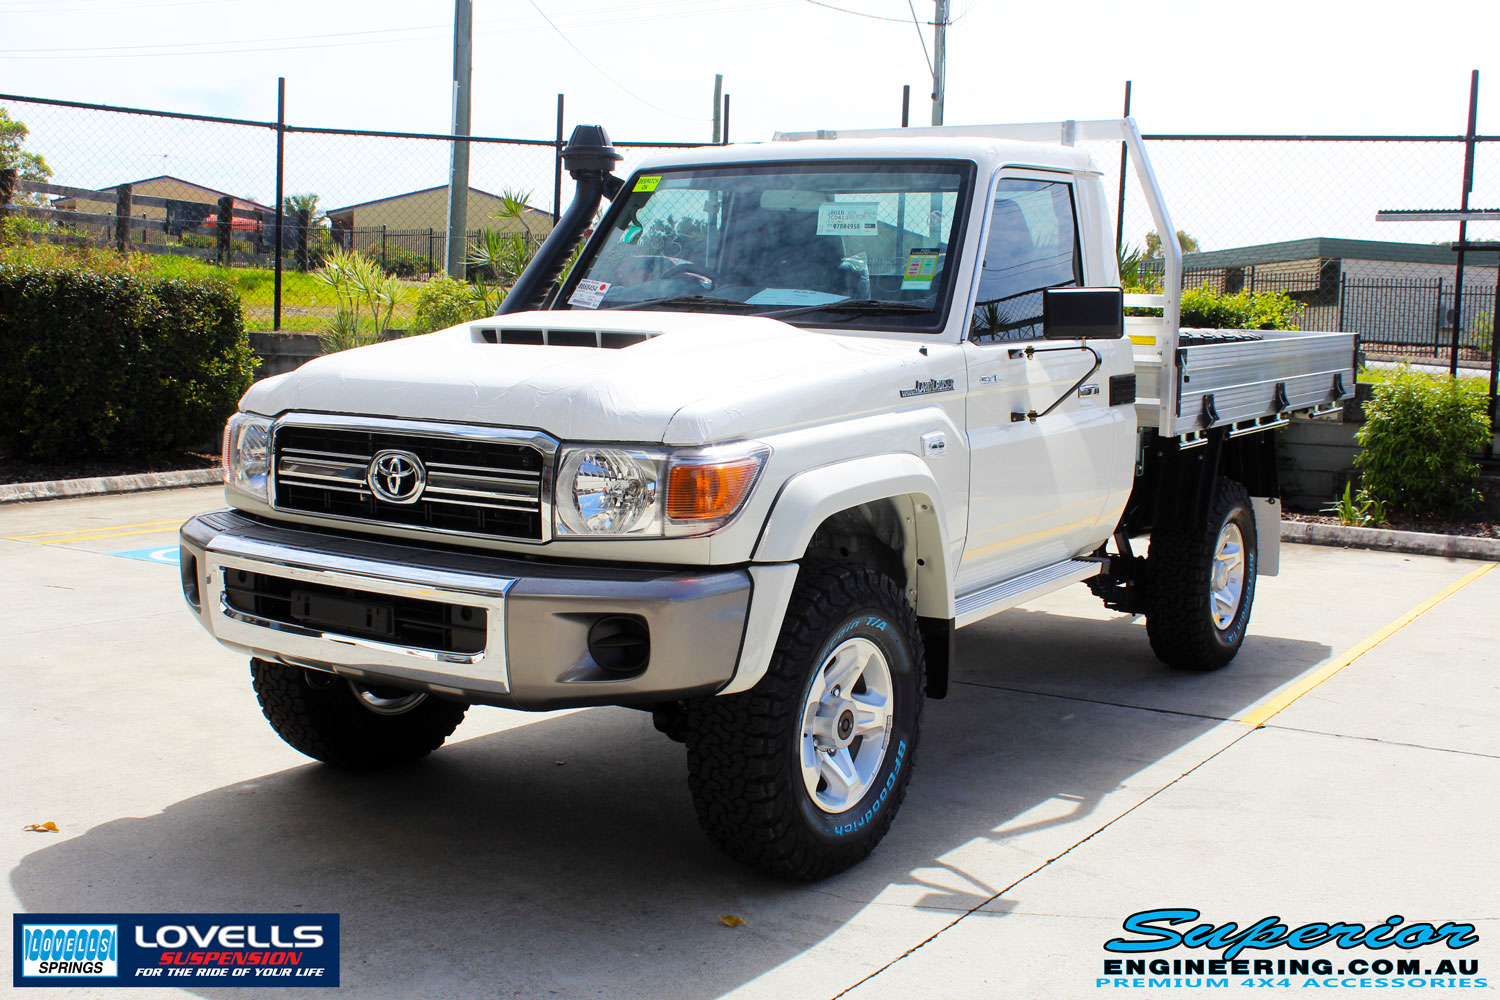 Left front side view of a Toyota Landcruiser 79 Series after fitment of a Lovells GVM Upgrade